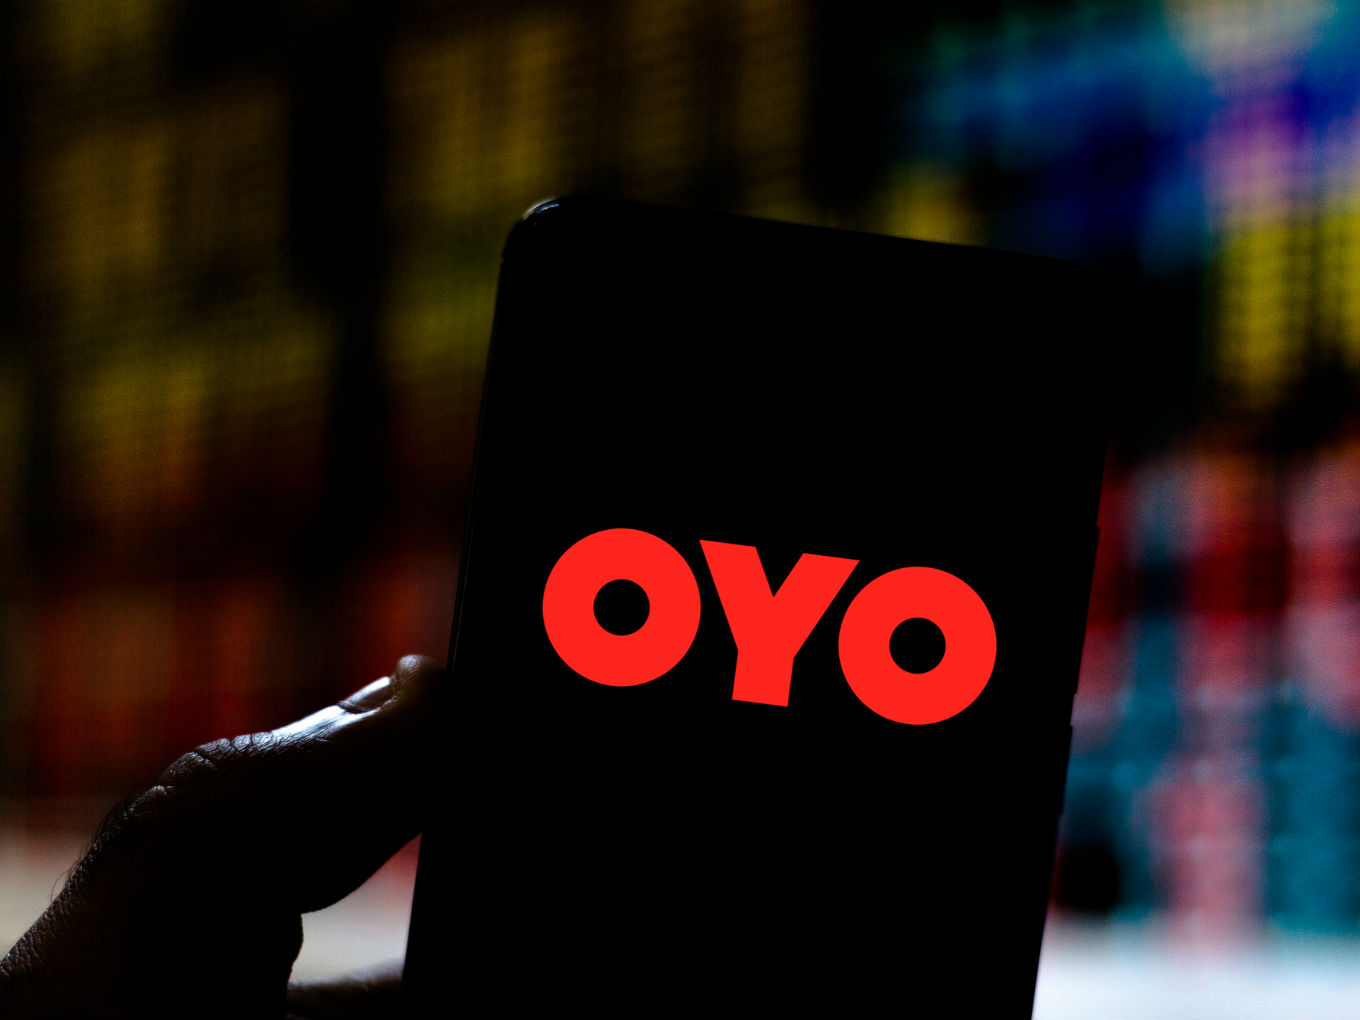 OYO Vs ZO Rooms: OYO Gets Shock From The Past Amid Mounting Troubles